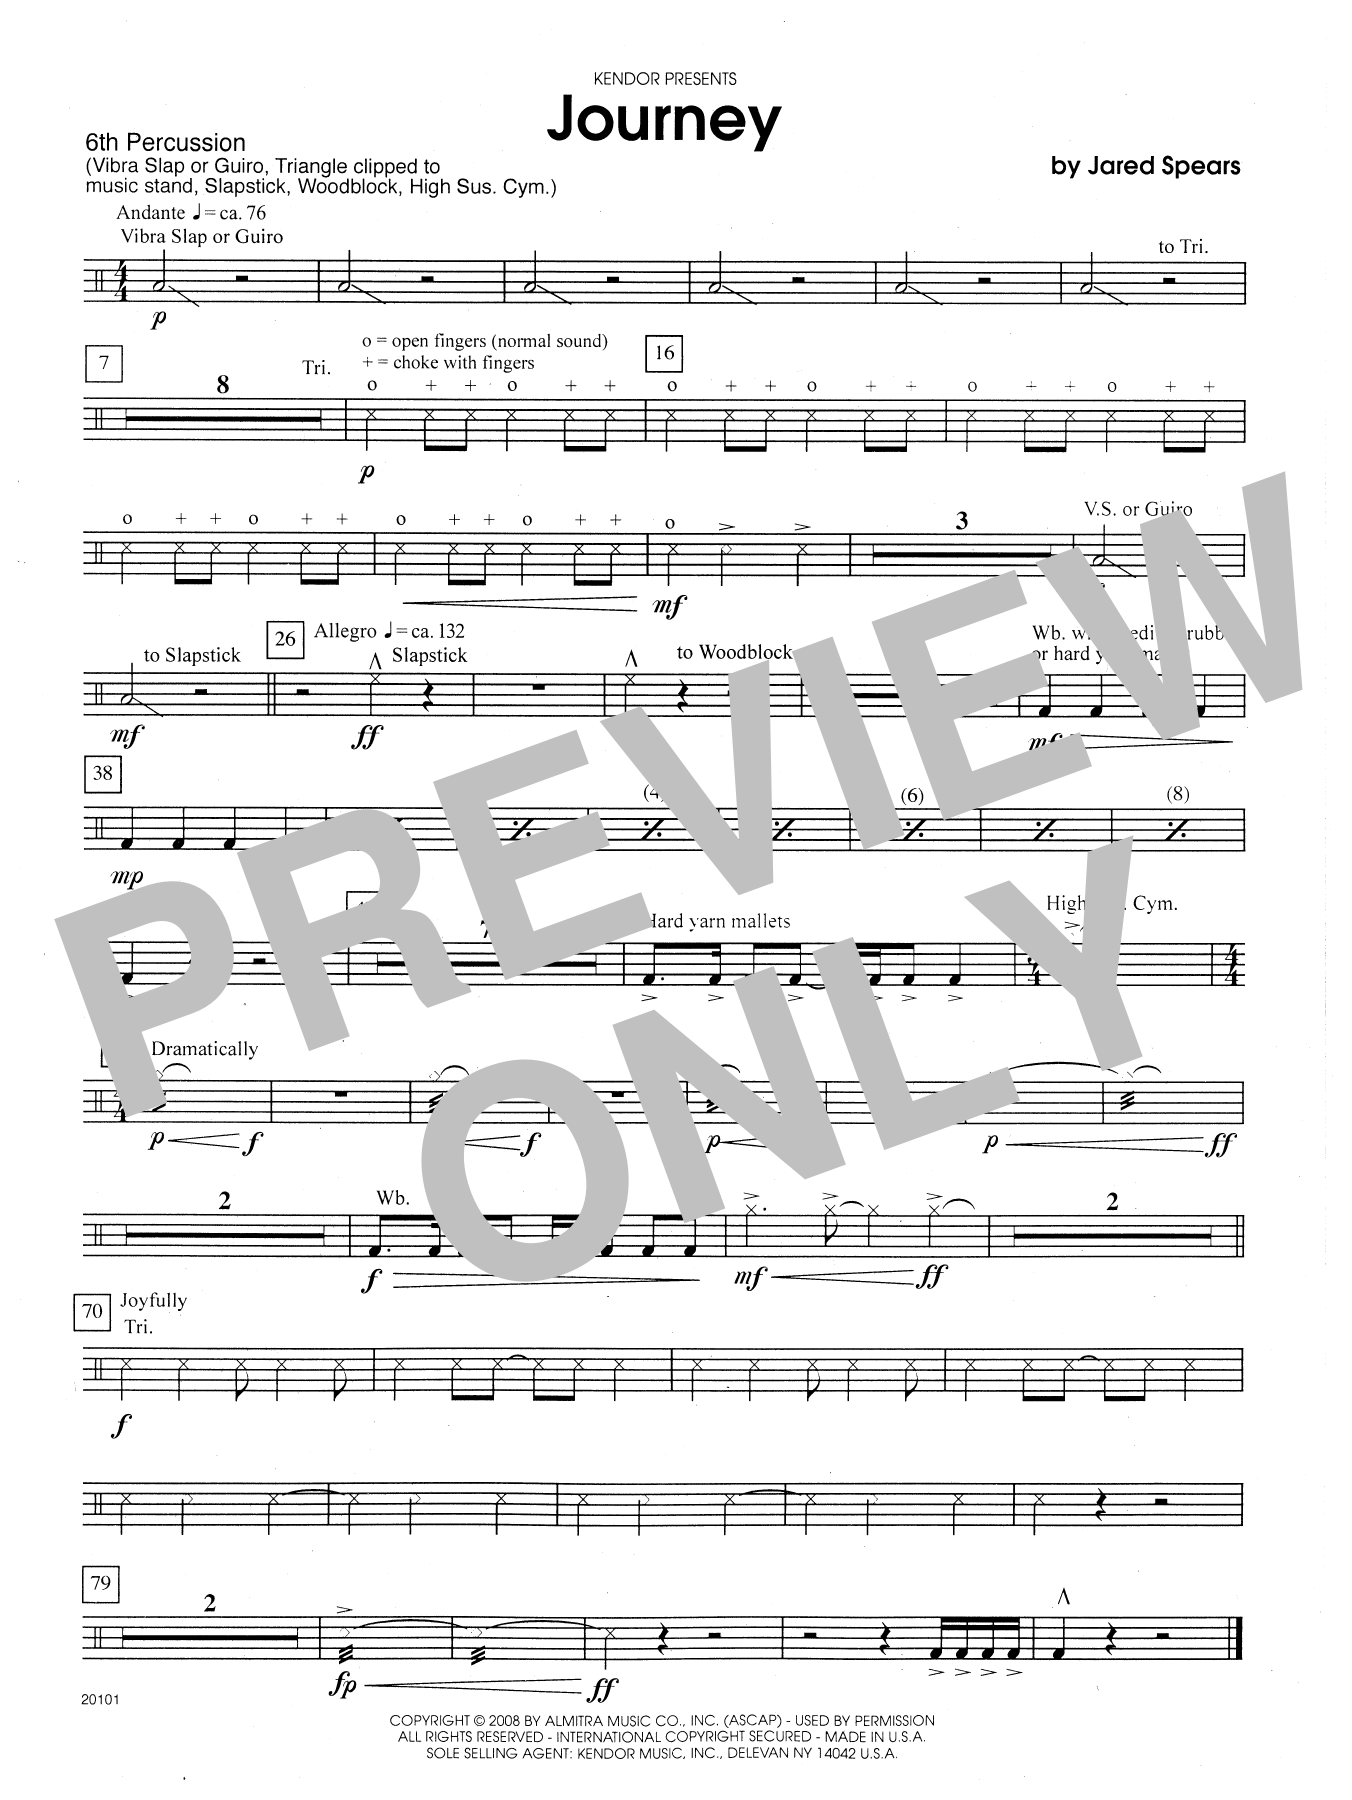 Download Jared Spears Journey - Percussion 6 Sheet Music